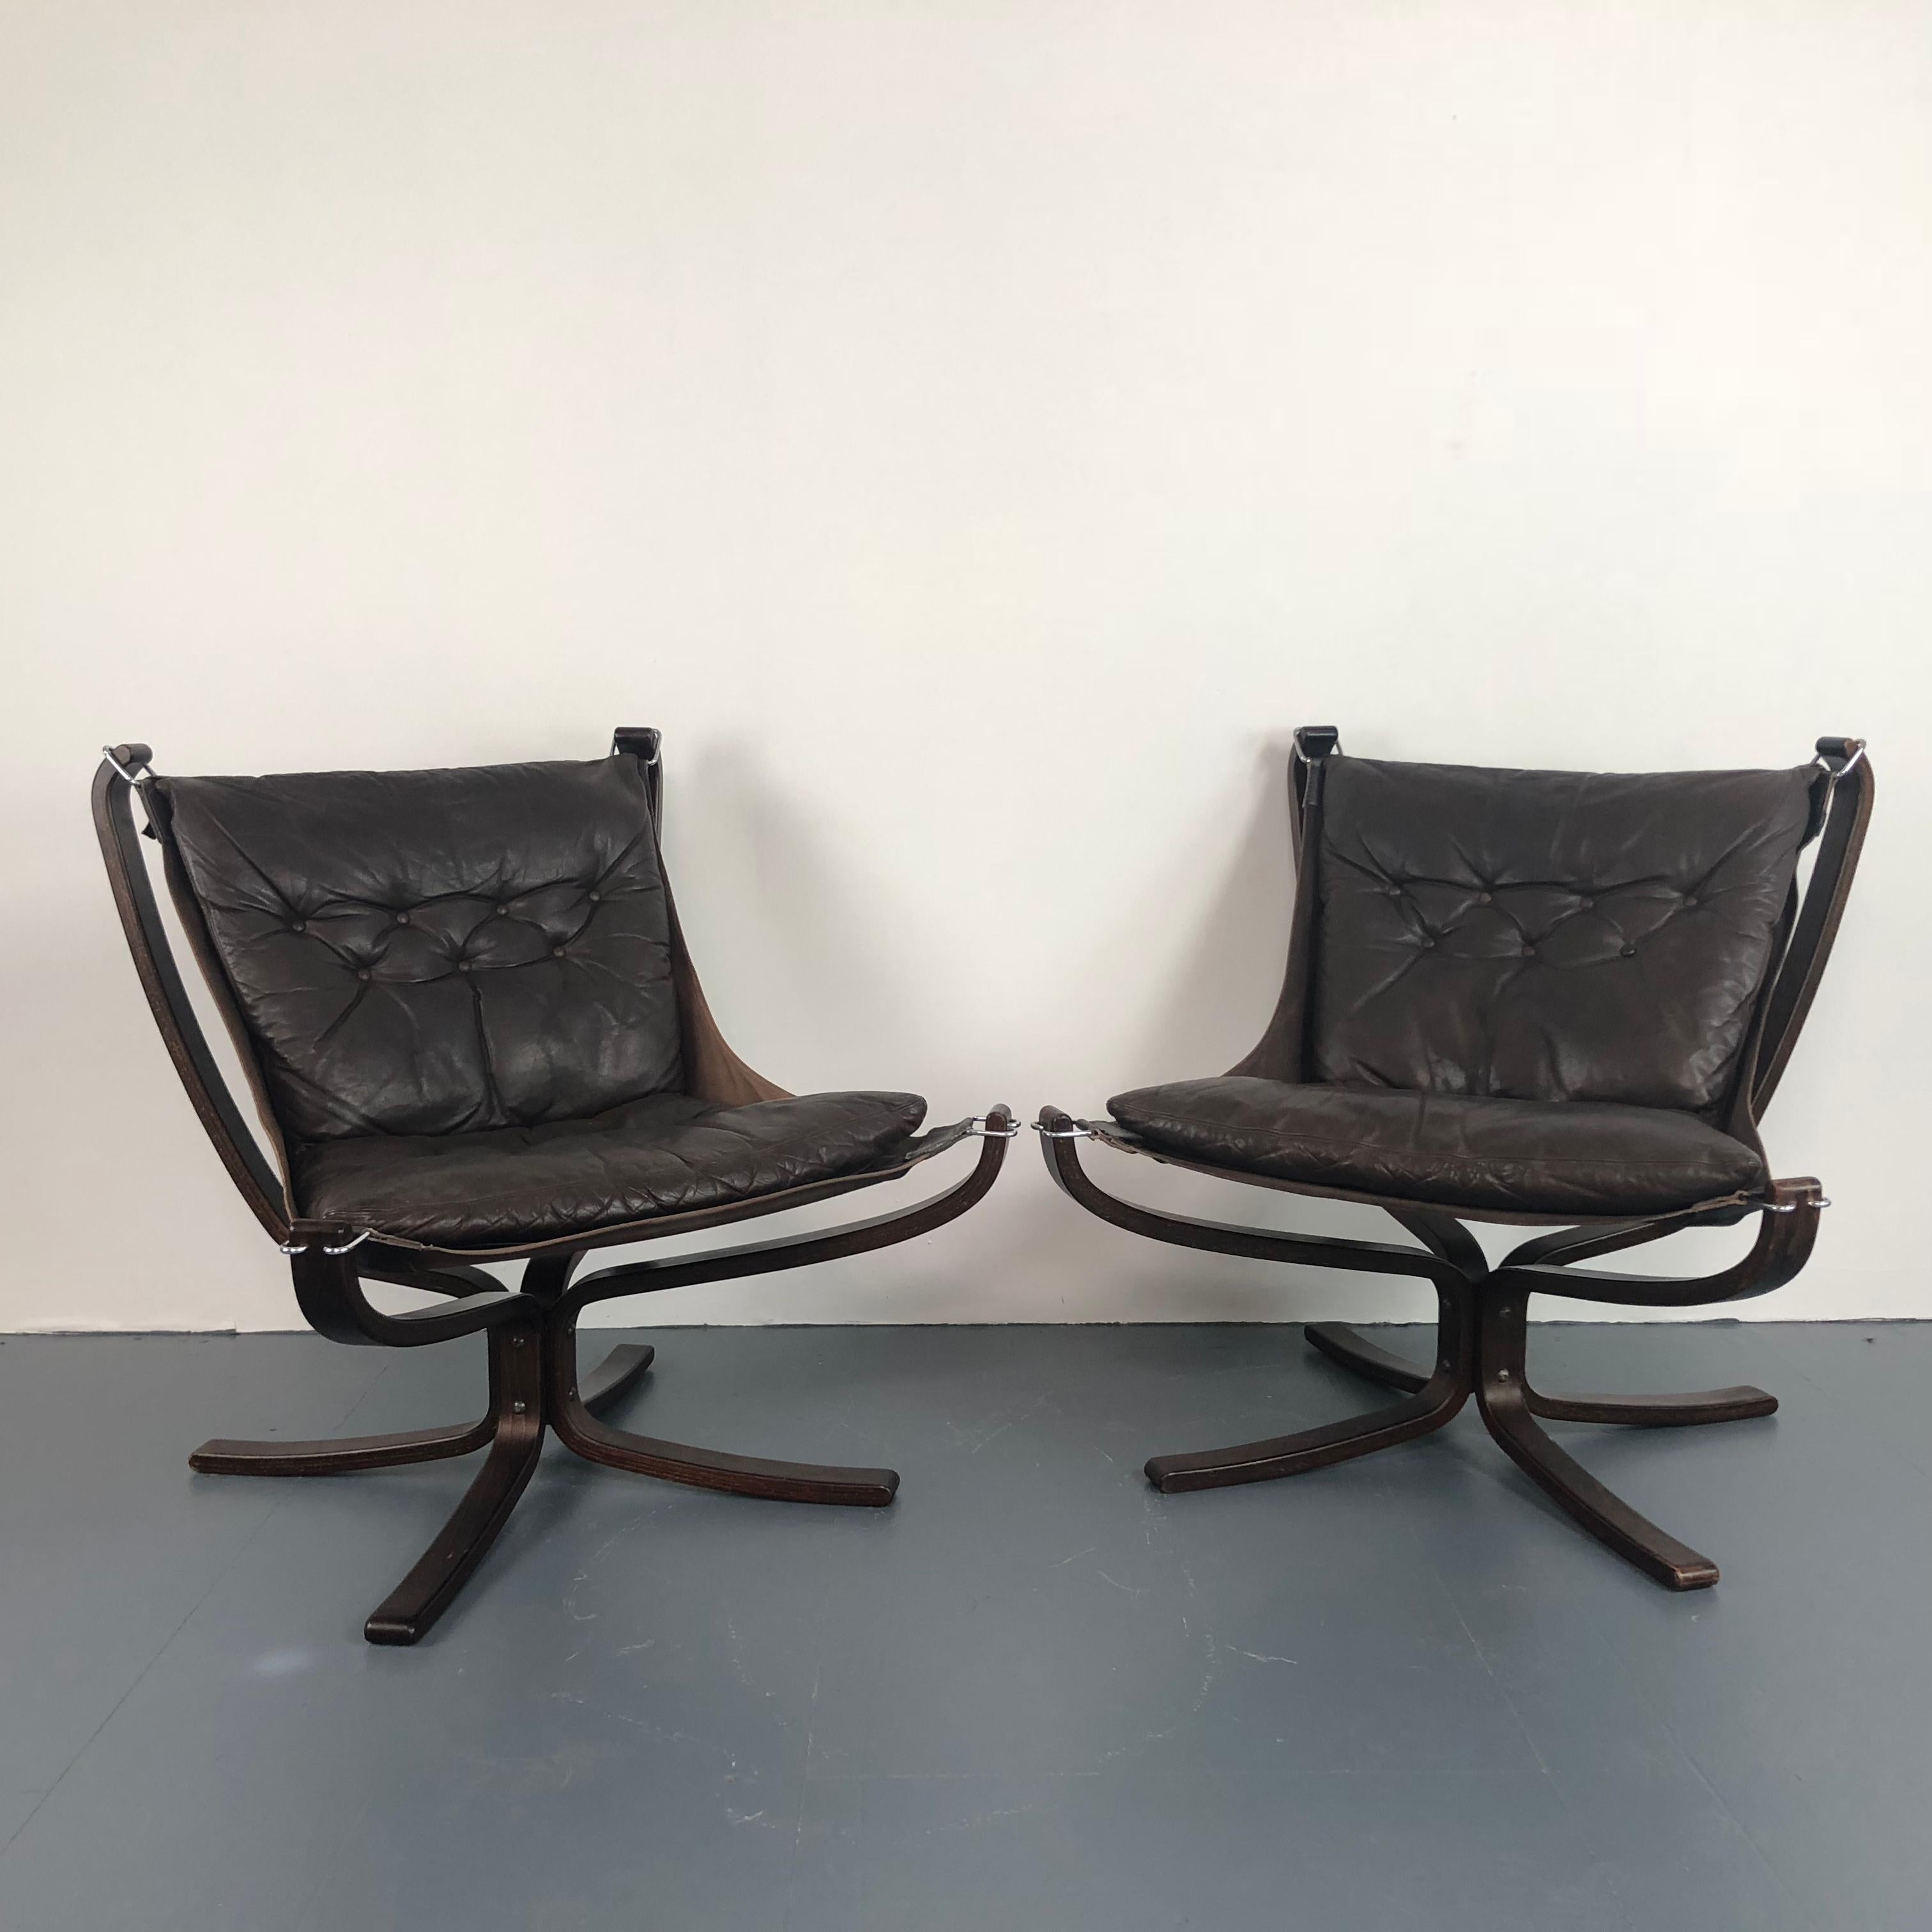 Lovely pair of low back dark brown leather Falcon chairs designed by the Norwegian designer, Sigurd Resell, in the 1970s. With rosewood base which is an X shape. 

In good vintage condition. The leather is in good condition for its age with no